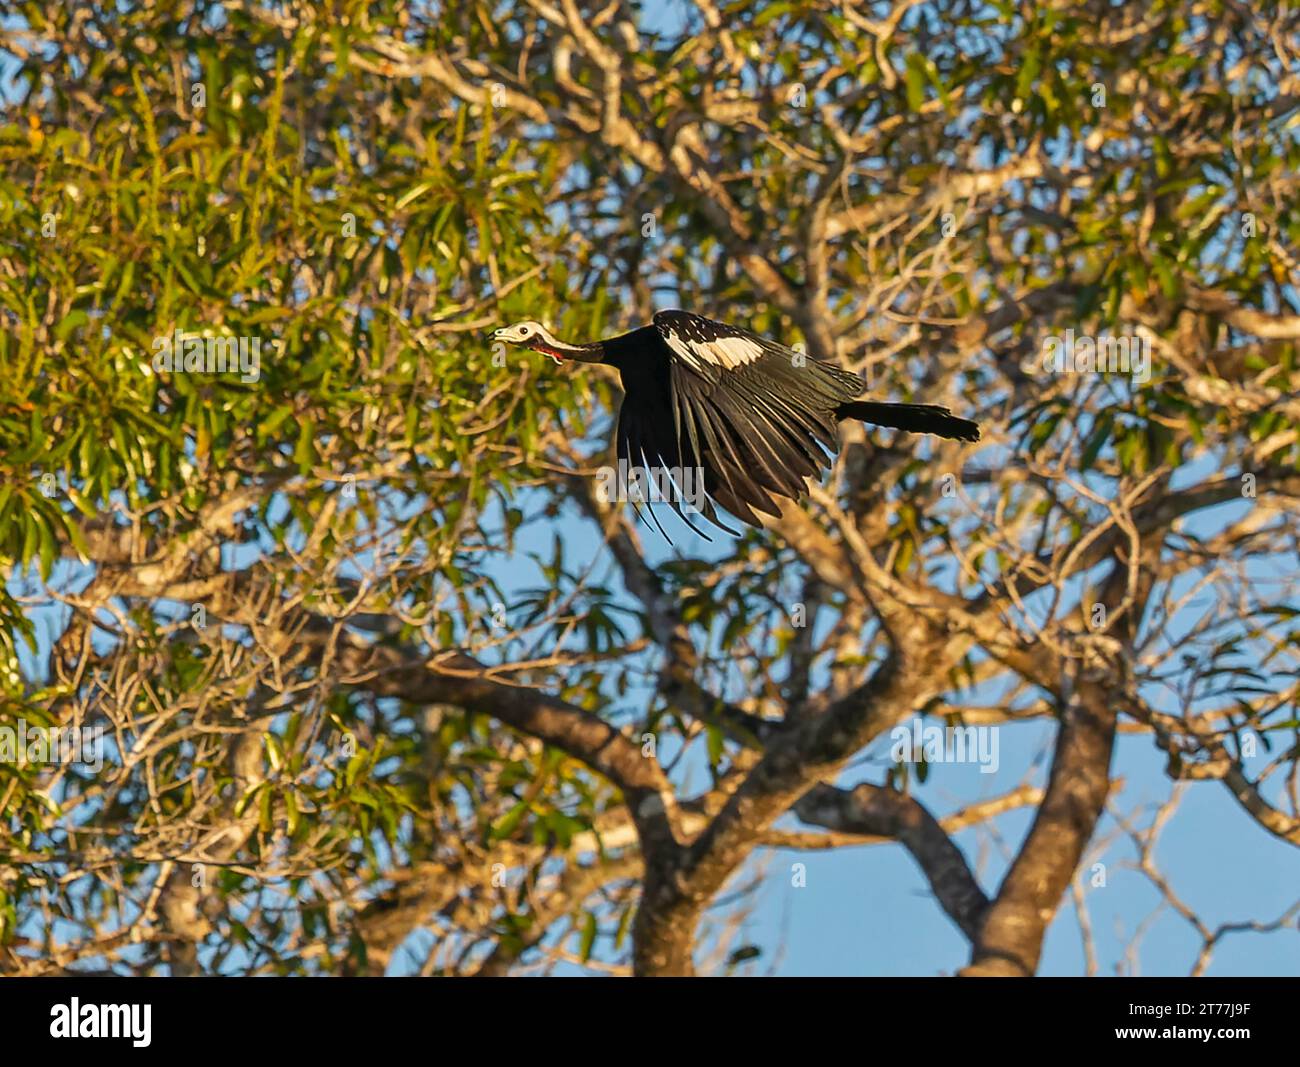 Red-throated piping guan (Pipile cujubi), adult in flight, vulnerable species, Brazil, Pantanal Stock Photo